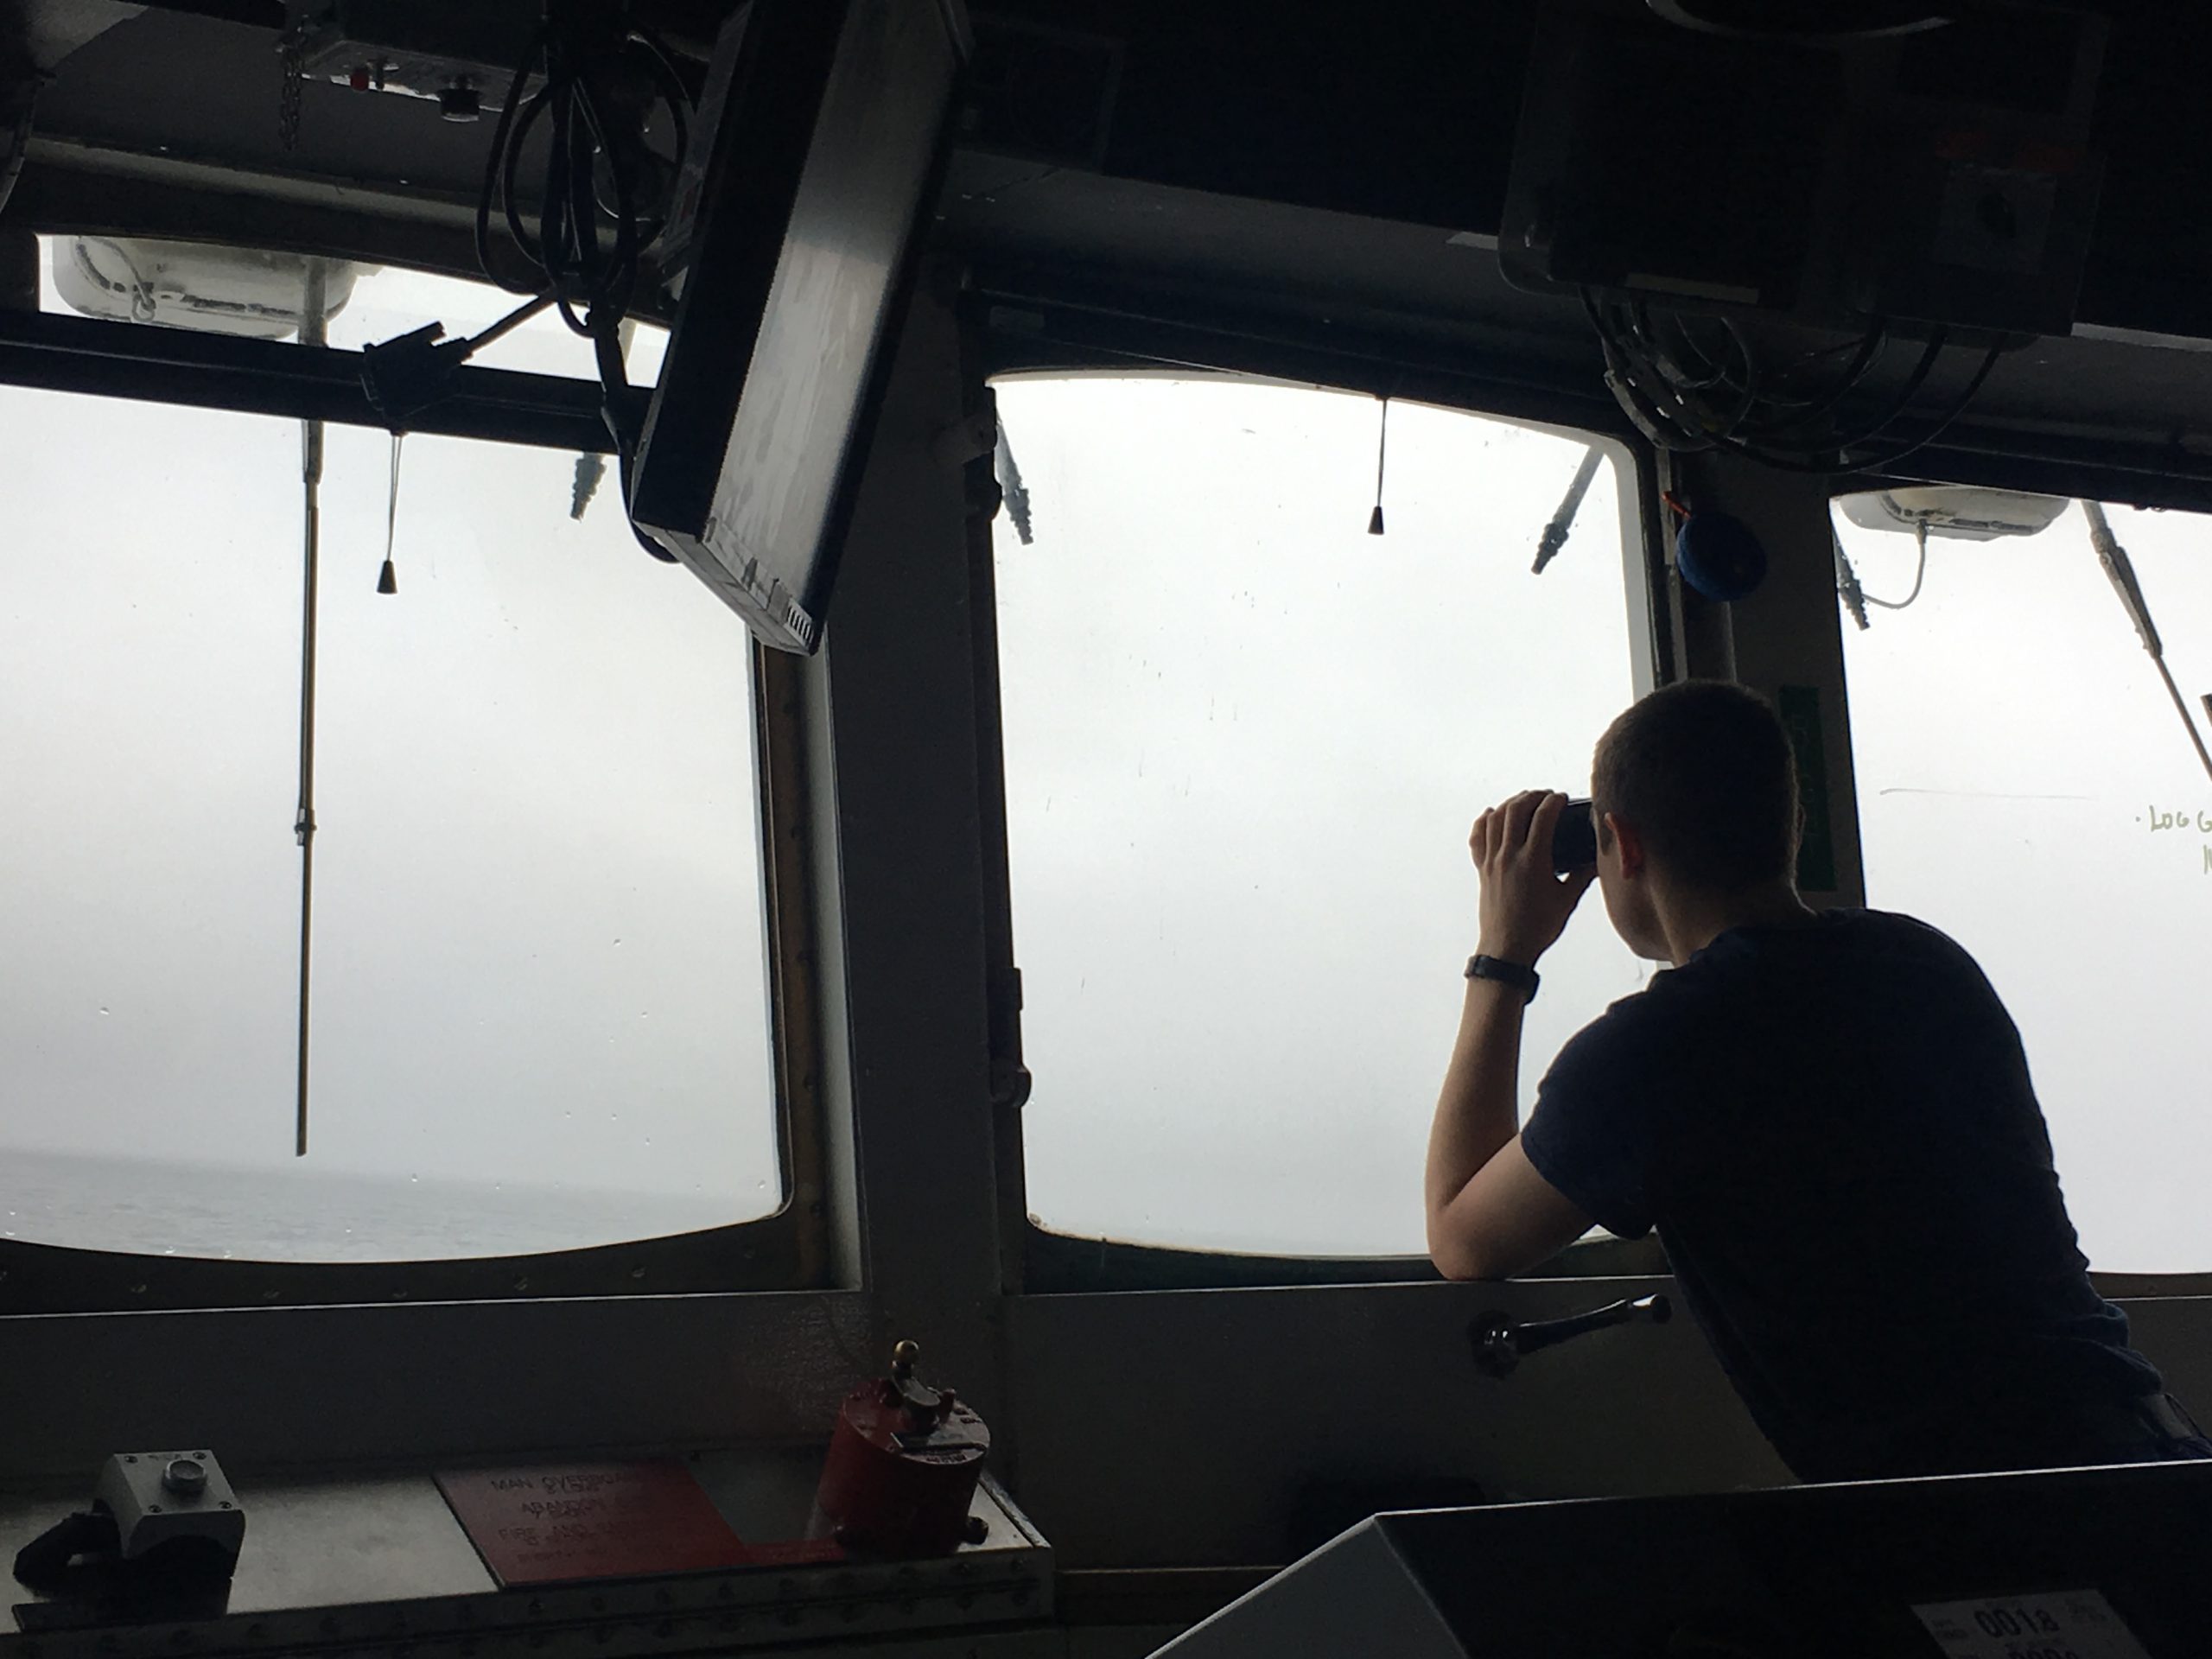 A NOAA Corp officer watches for hazards to navigation on board NOAA Ship Fairweather.